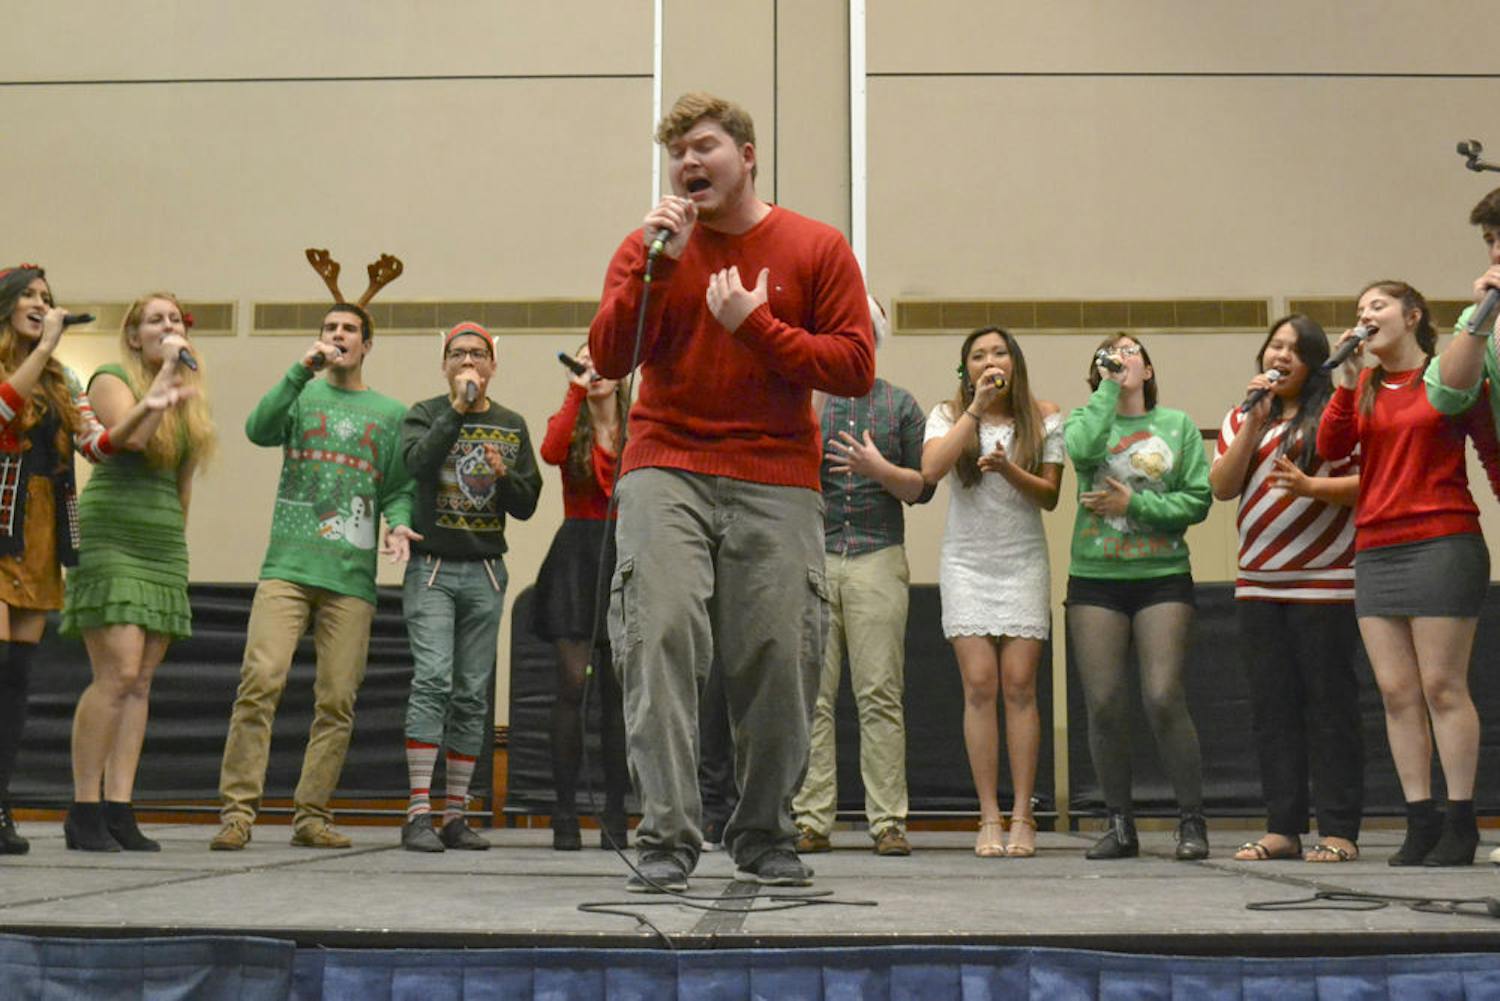 John Nyren, a 22-year-old UF computer science senior, belts out “Lay Me Down” by Sam Smith with the UF a capella group Tone Deaf at the annual “Falala Cappella” concert in the Reitz Grand Ballroom on Dec. 7, 2015. Nyren has been with the group one semester and already says he “loves them like family.”